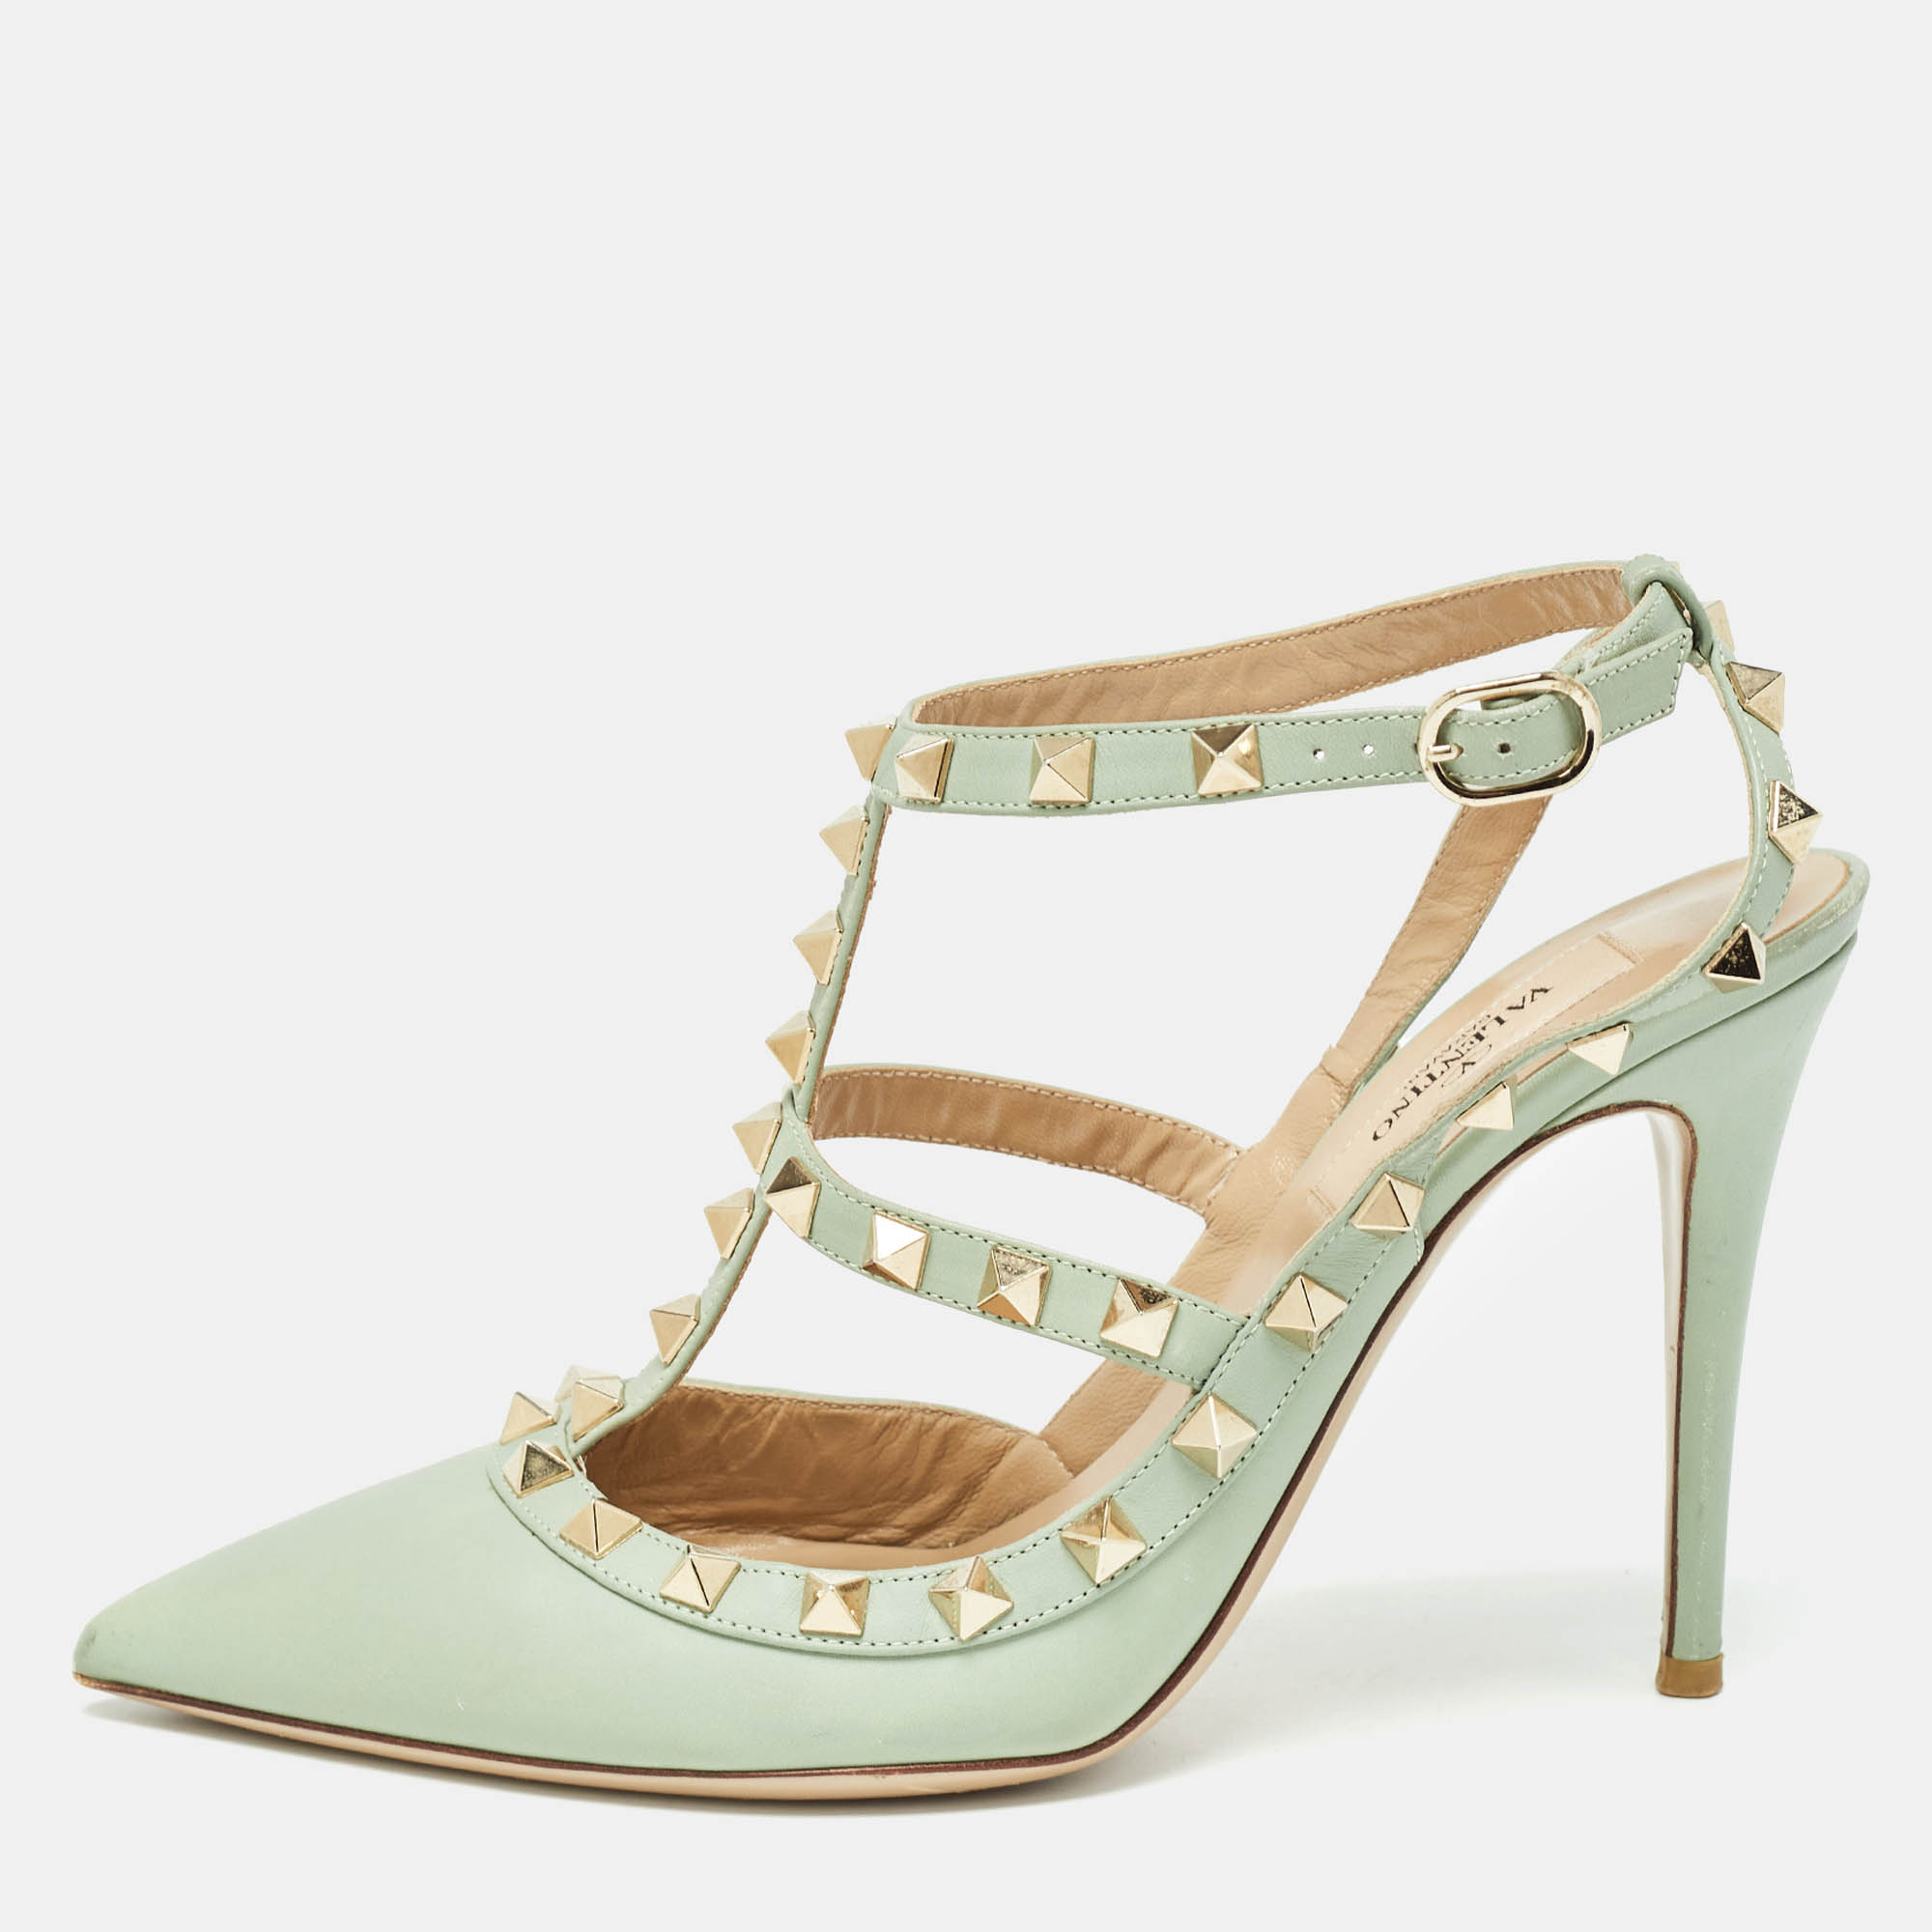 Valentino mint green leather rockstud ankle strap pumps size 38